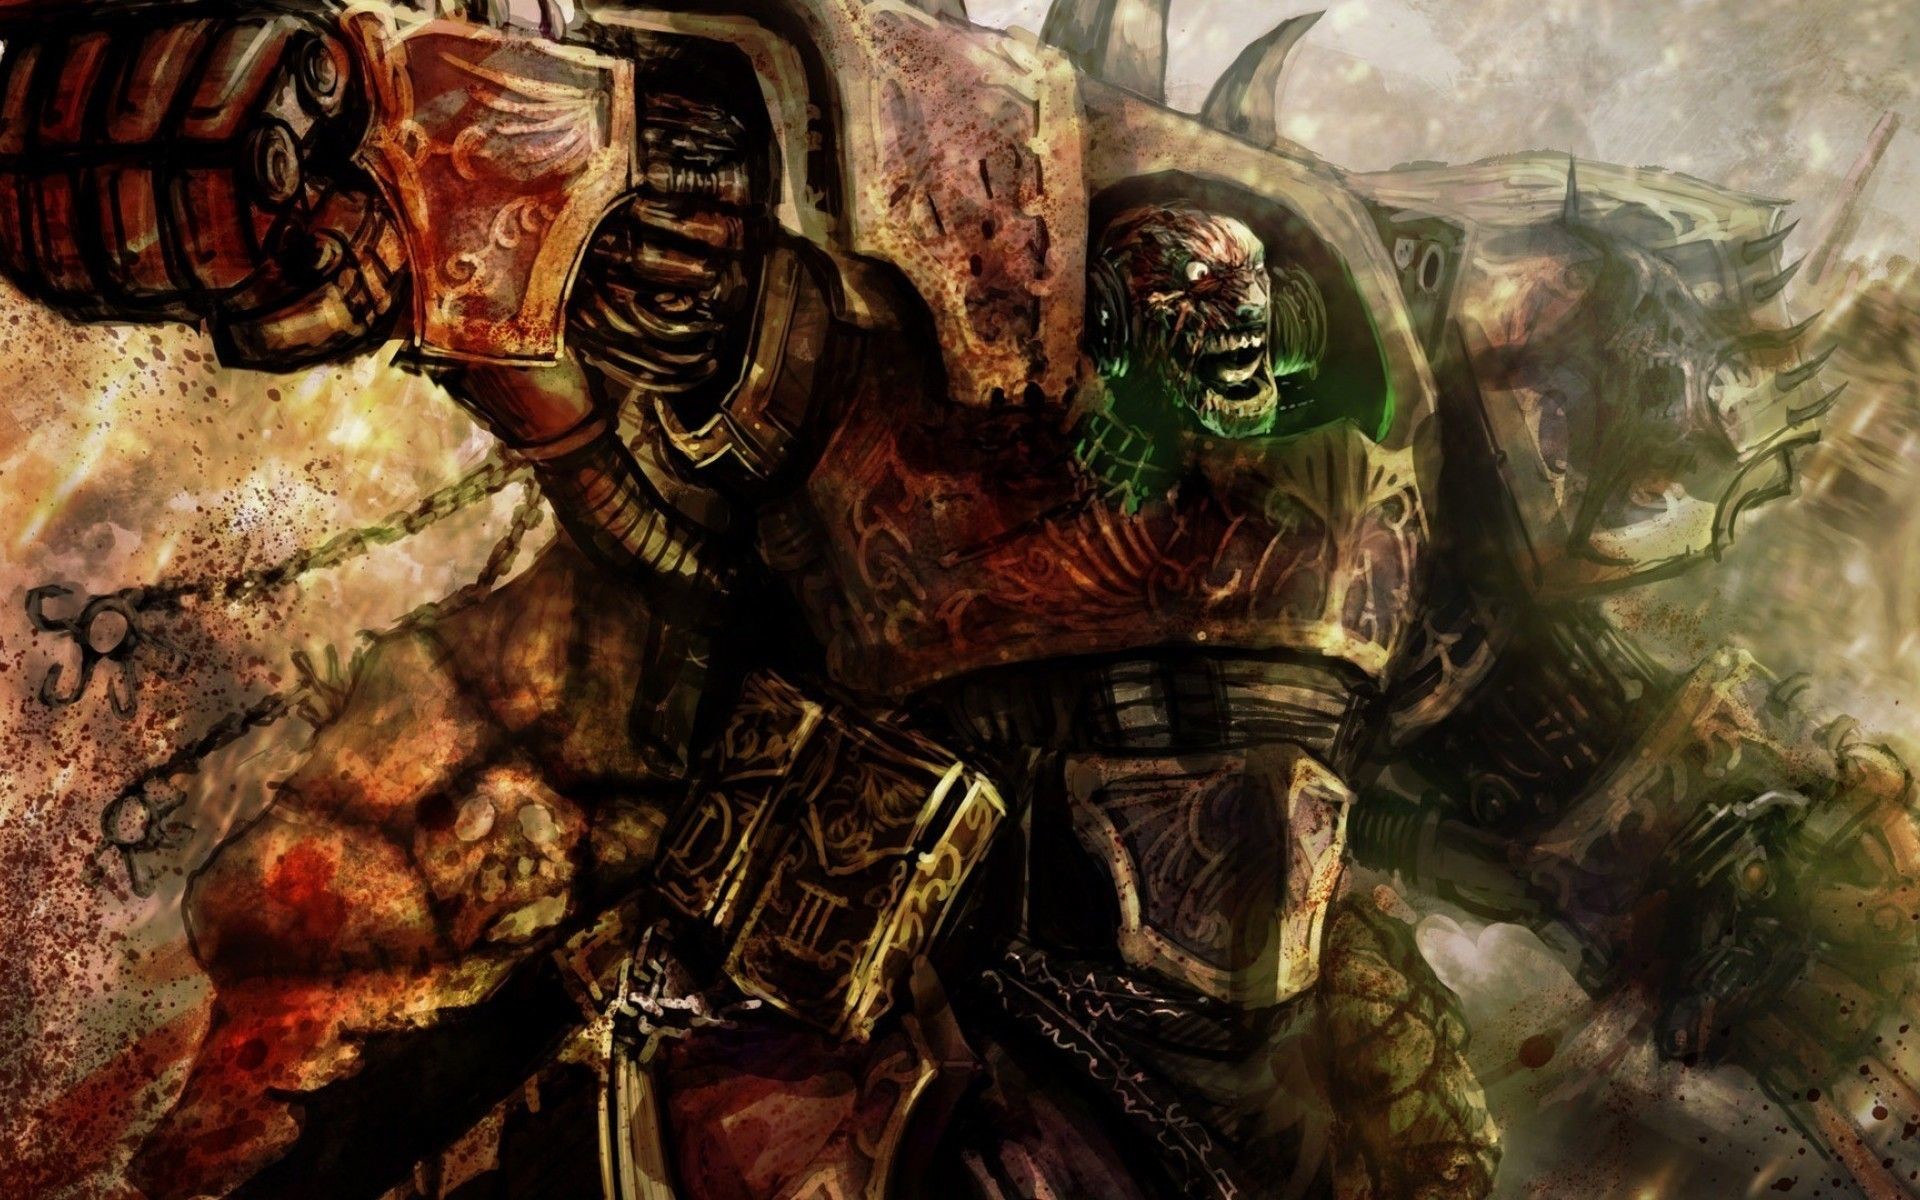 1920x1200 you may also like orks wallpaper tyranid wallpaper warhammer 40k .